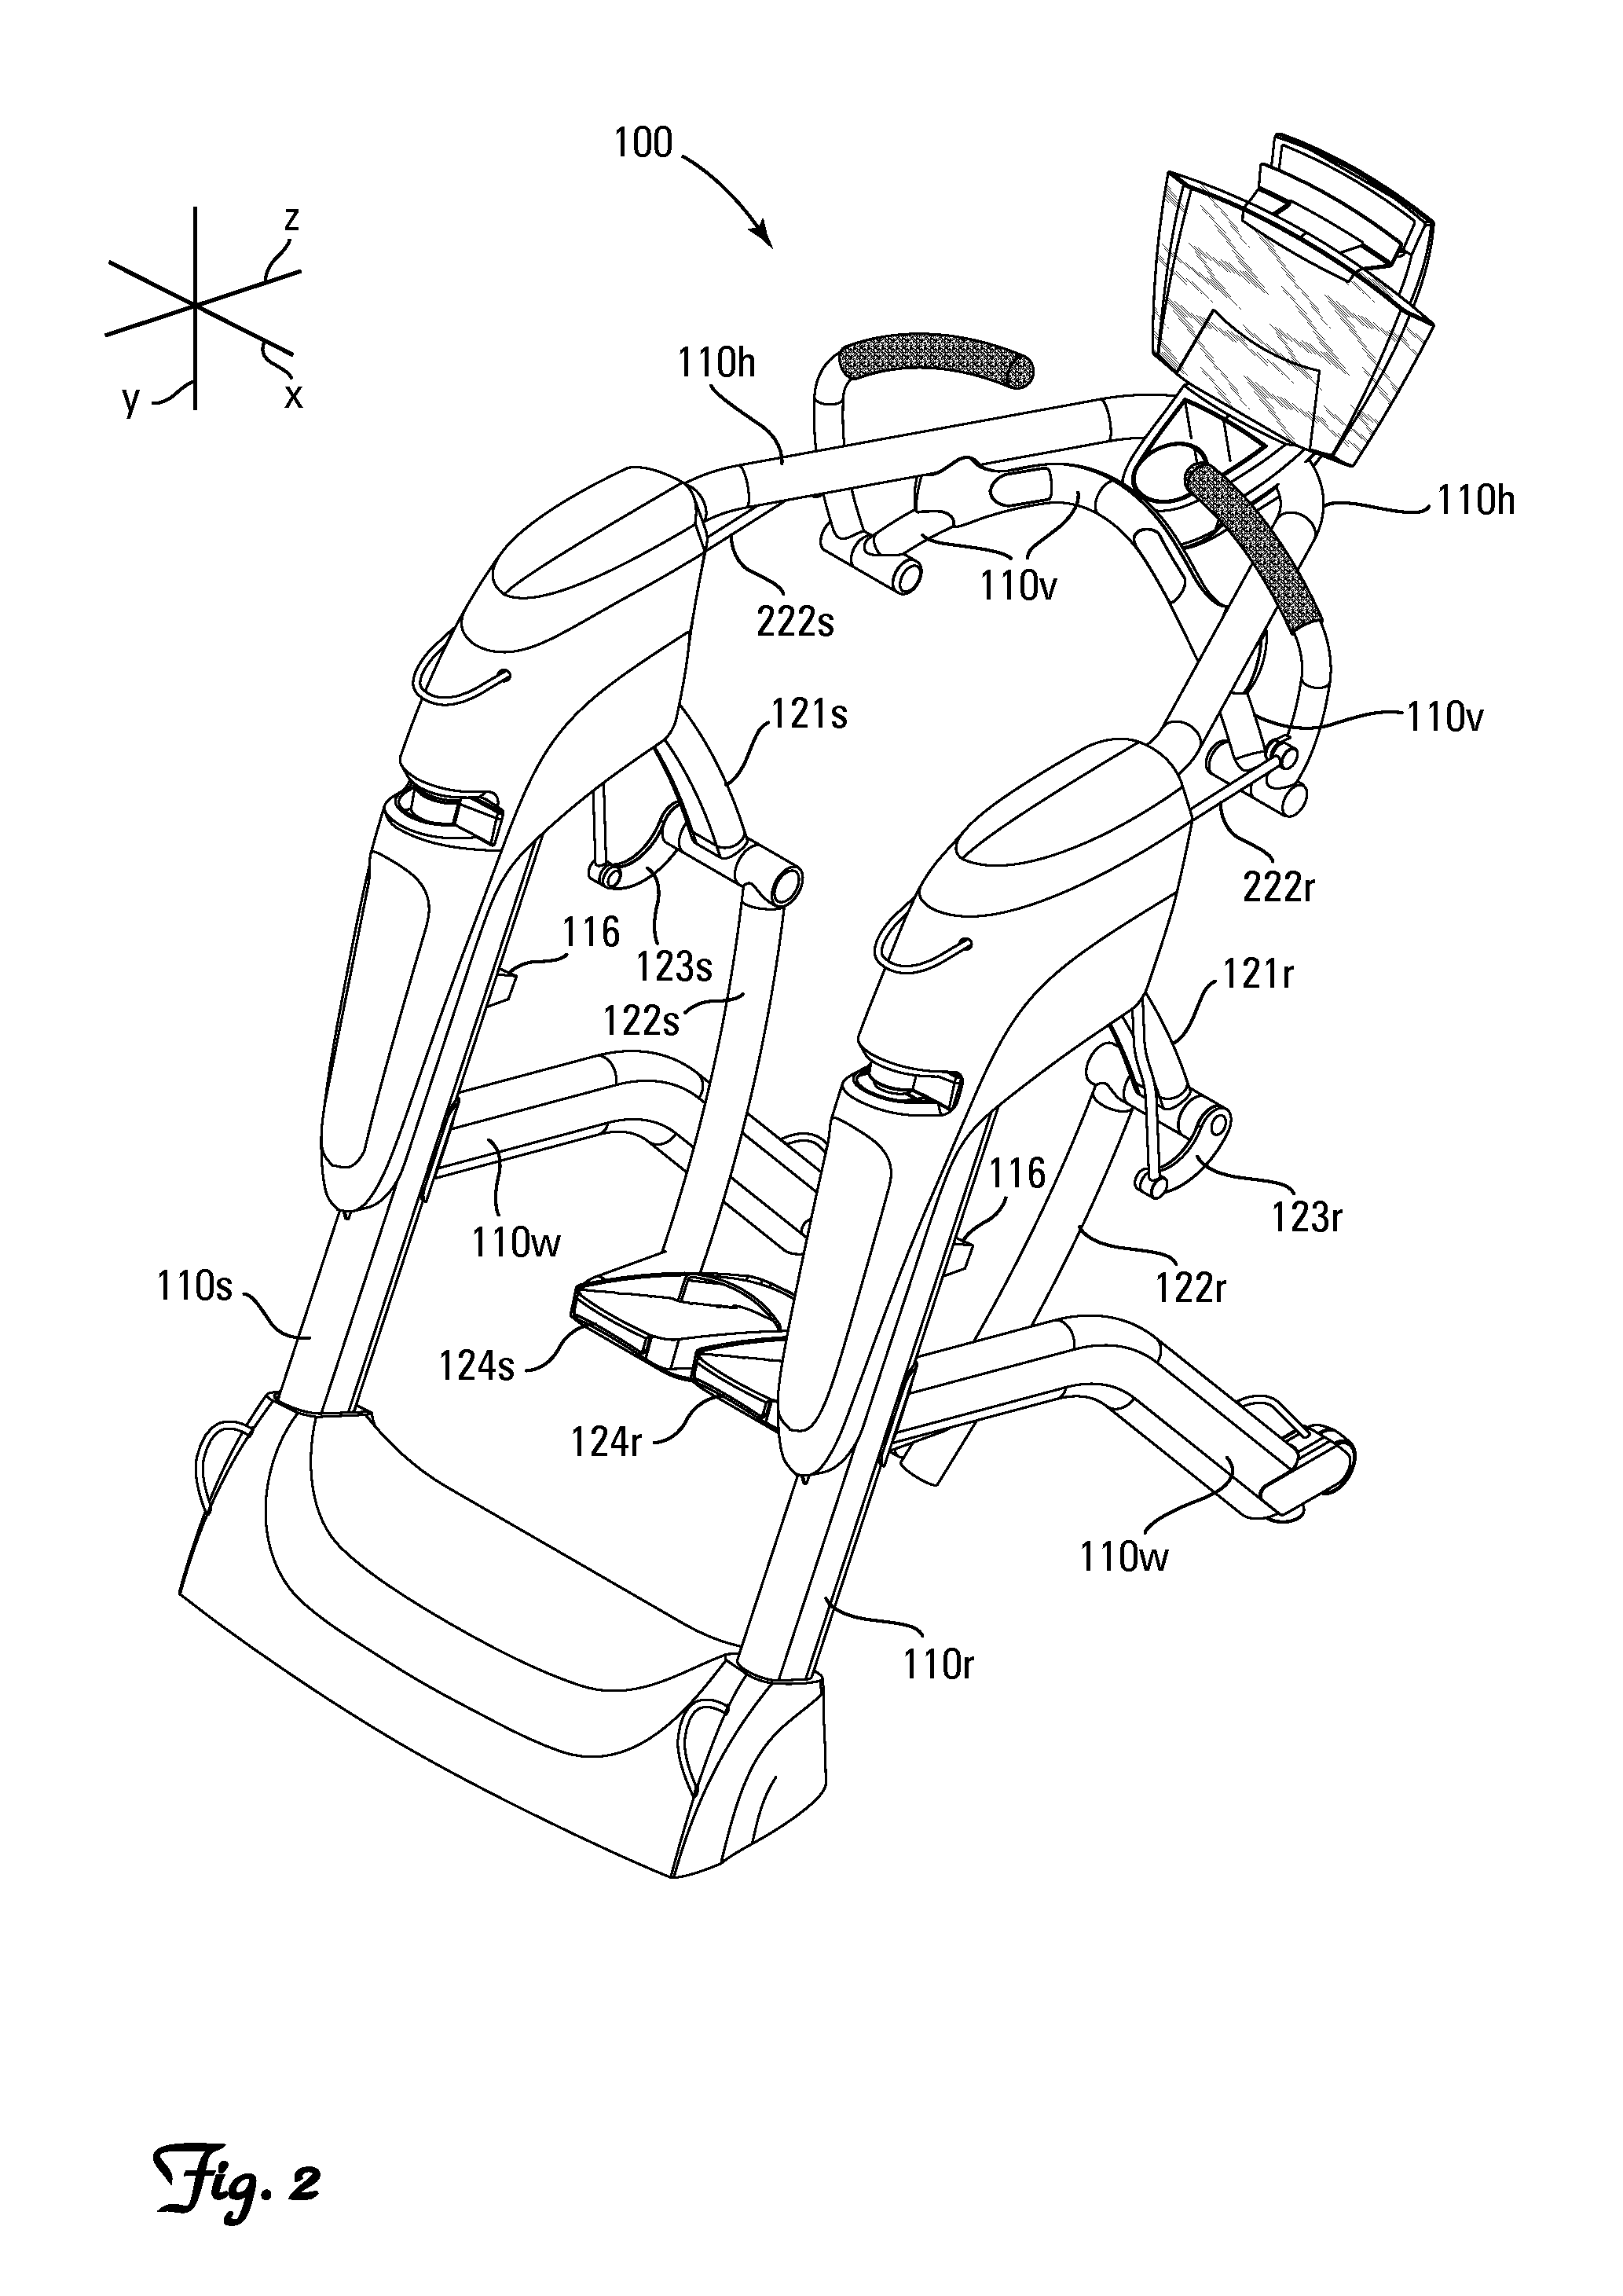 Lower body mimetic exercise device with fully or partially autonomous right and left leg links and ergonomically positioned pivot points